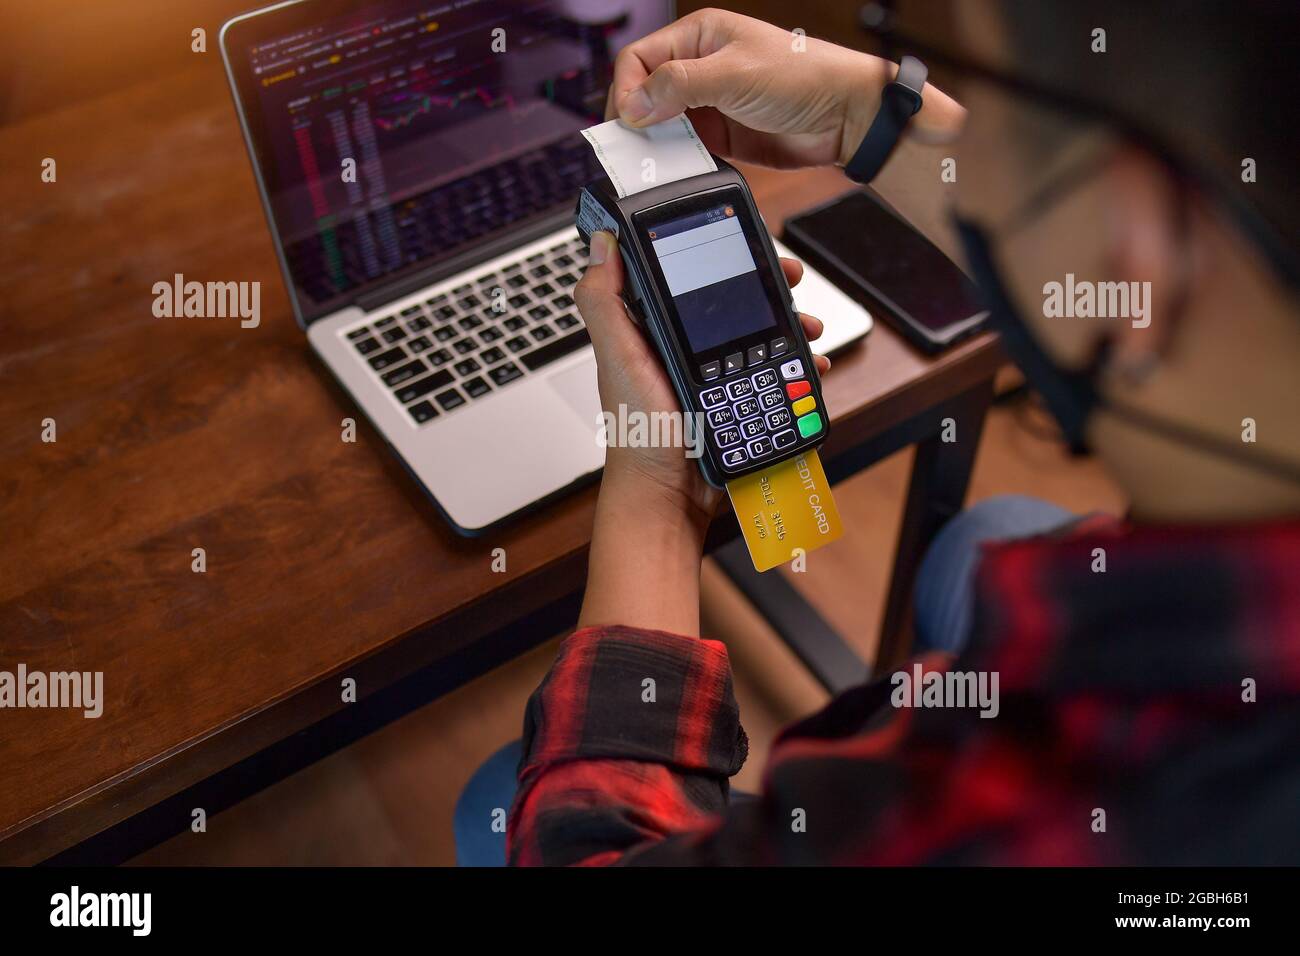 Man sitting at a table making a contactless payment on a credit card reader Stock Photo